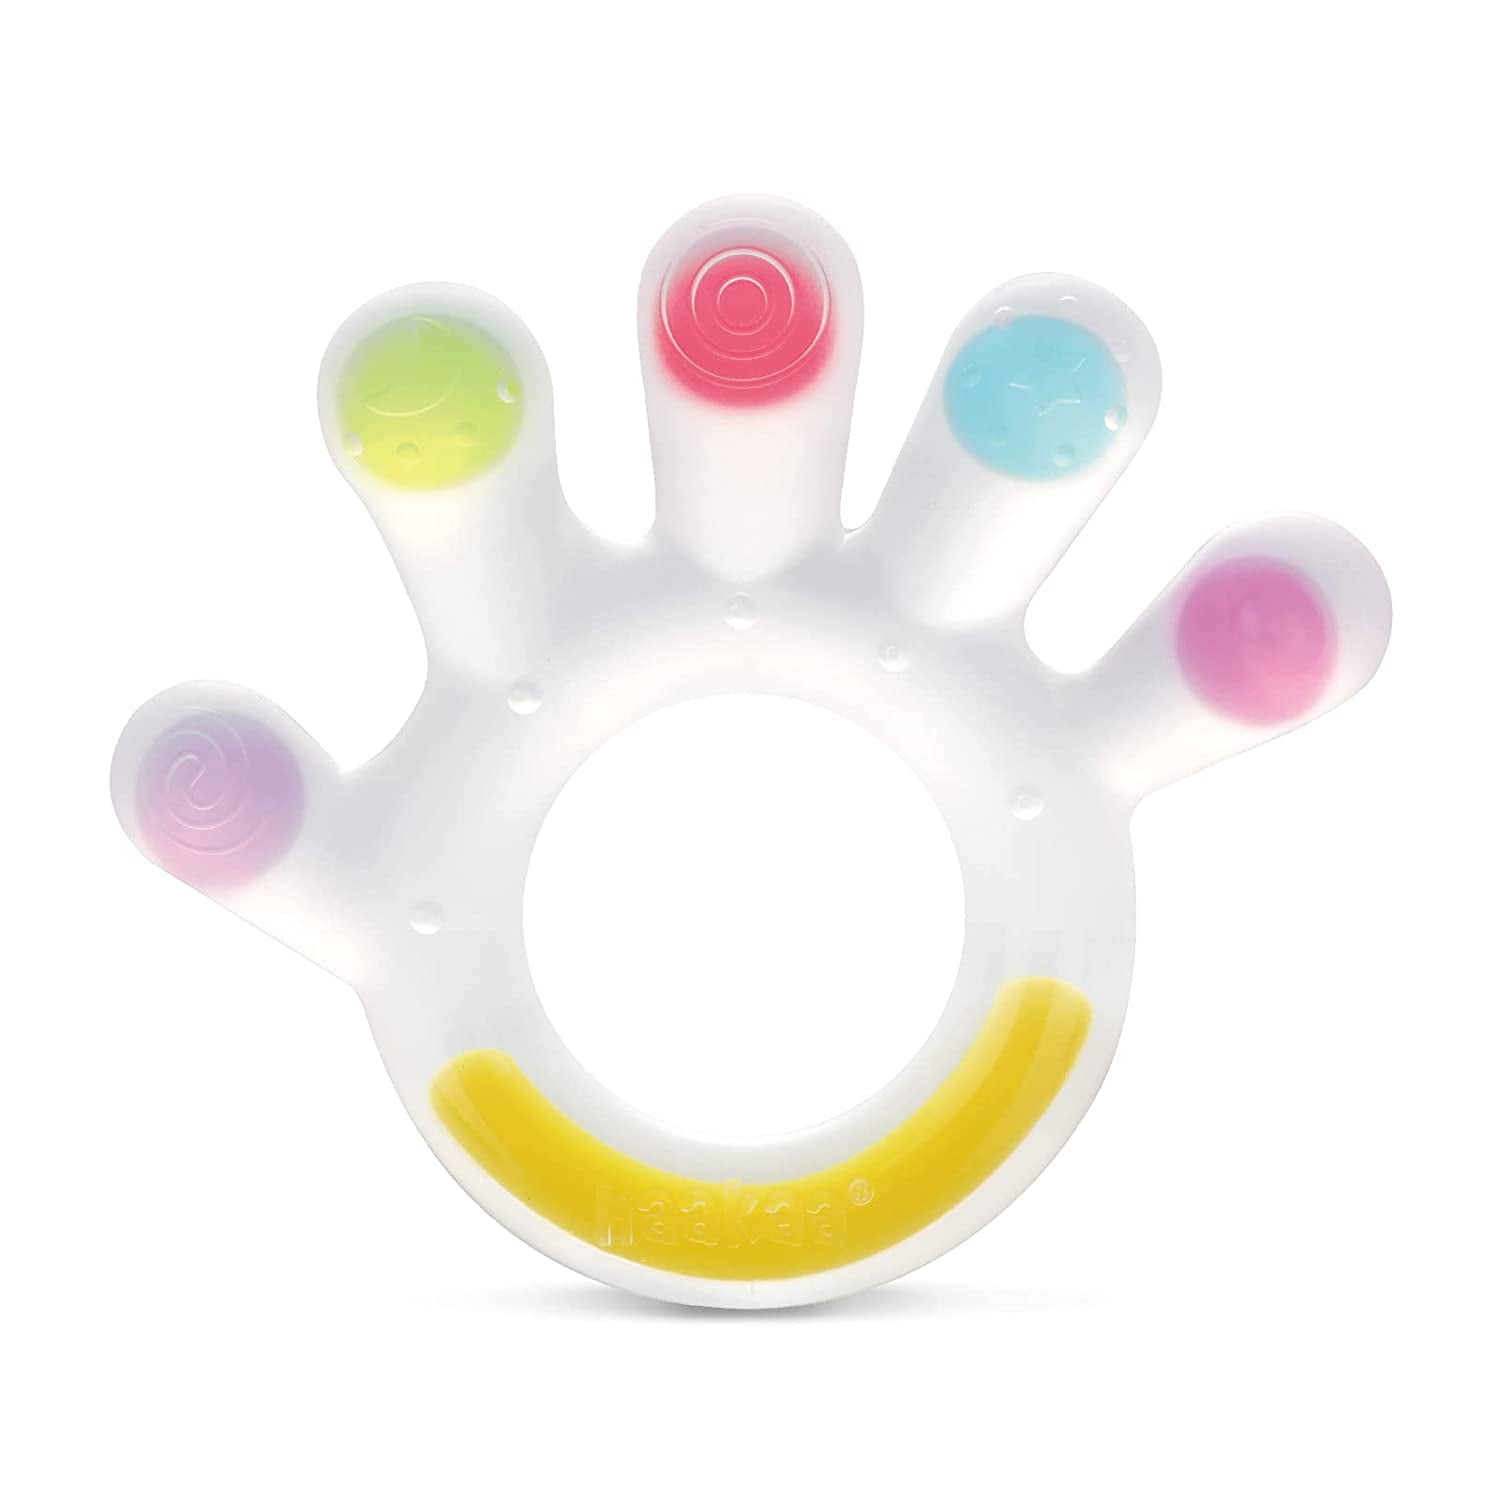 Circle Baby Teething Toy Soft Silicone BPA-free Infant Sensory Chew Pacifier Toy 